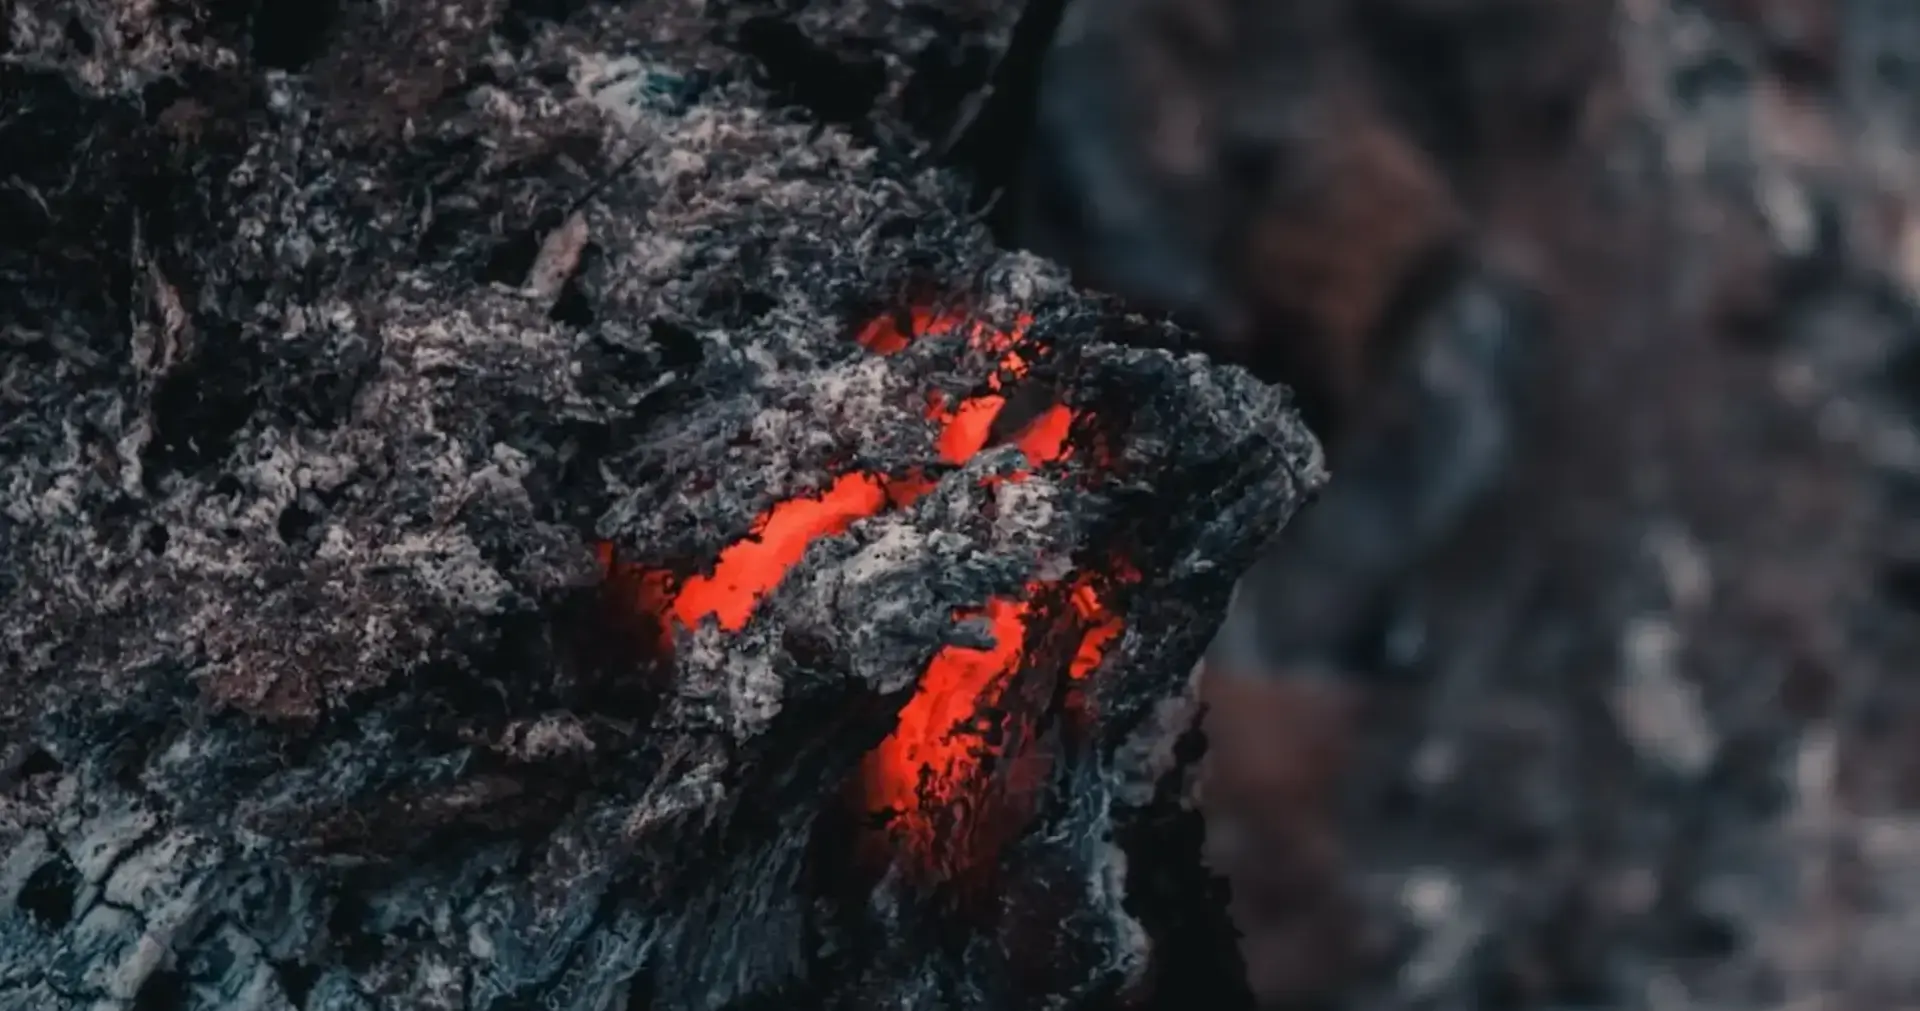 Volcanic Lava properties in skincare products